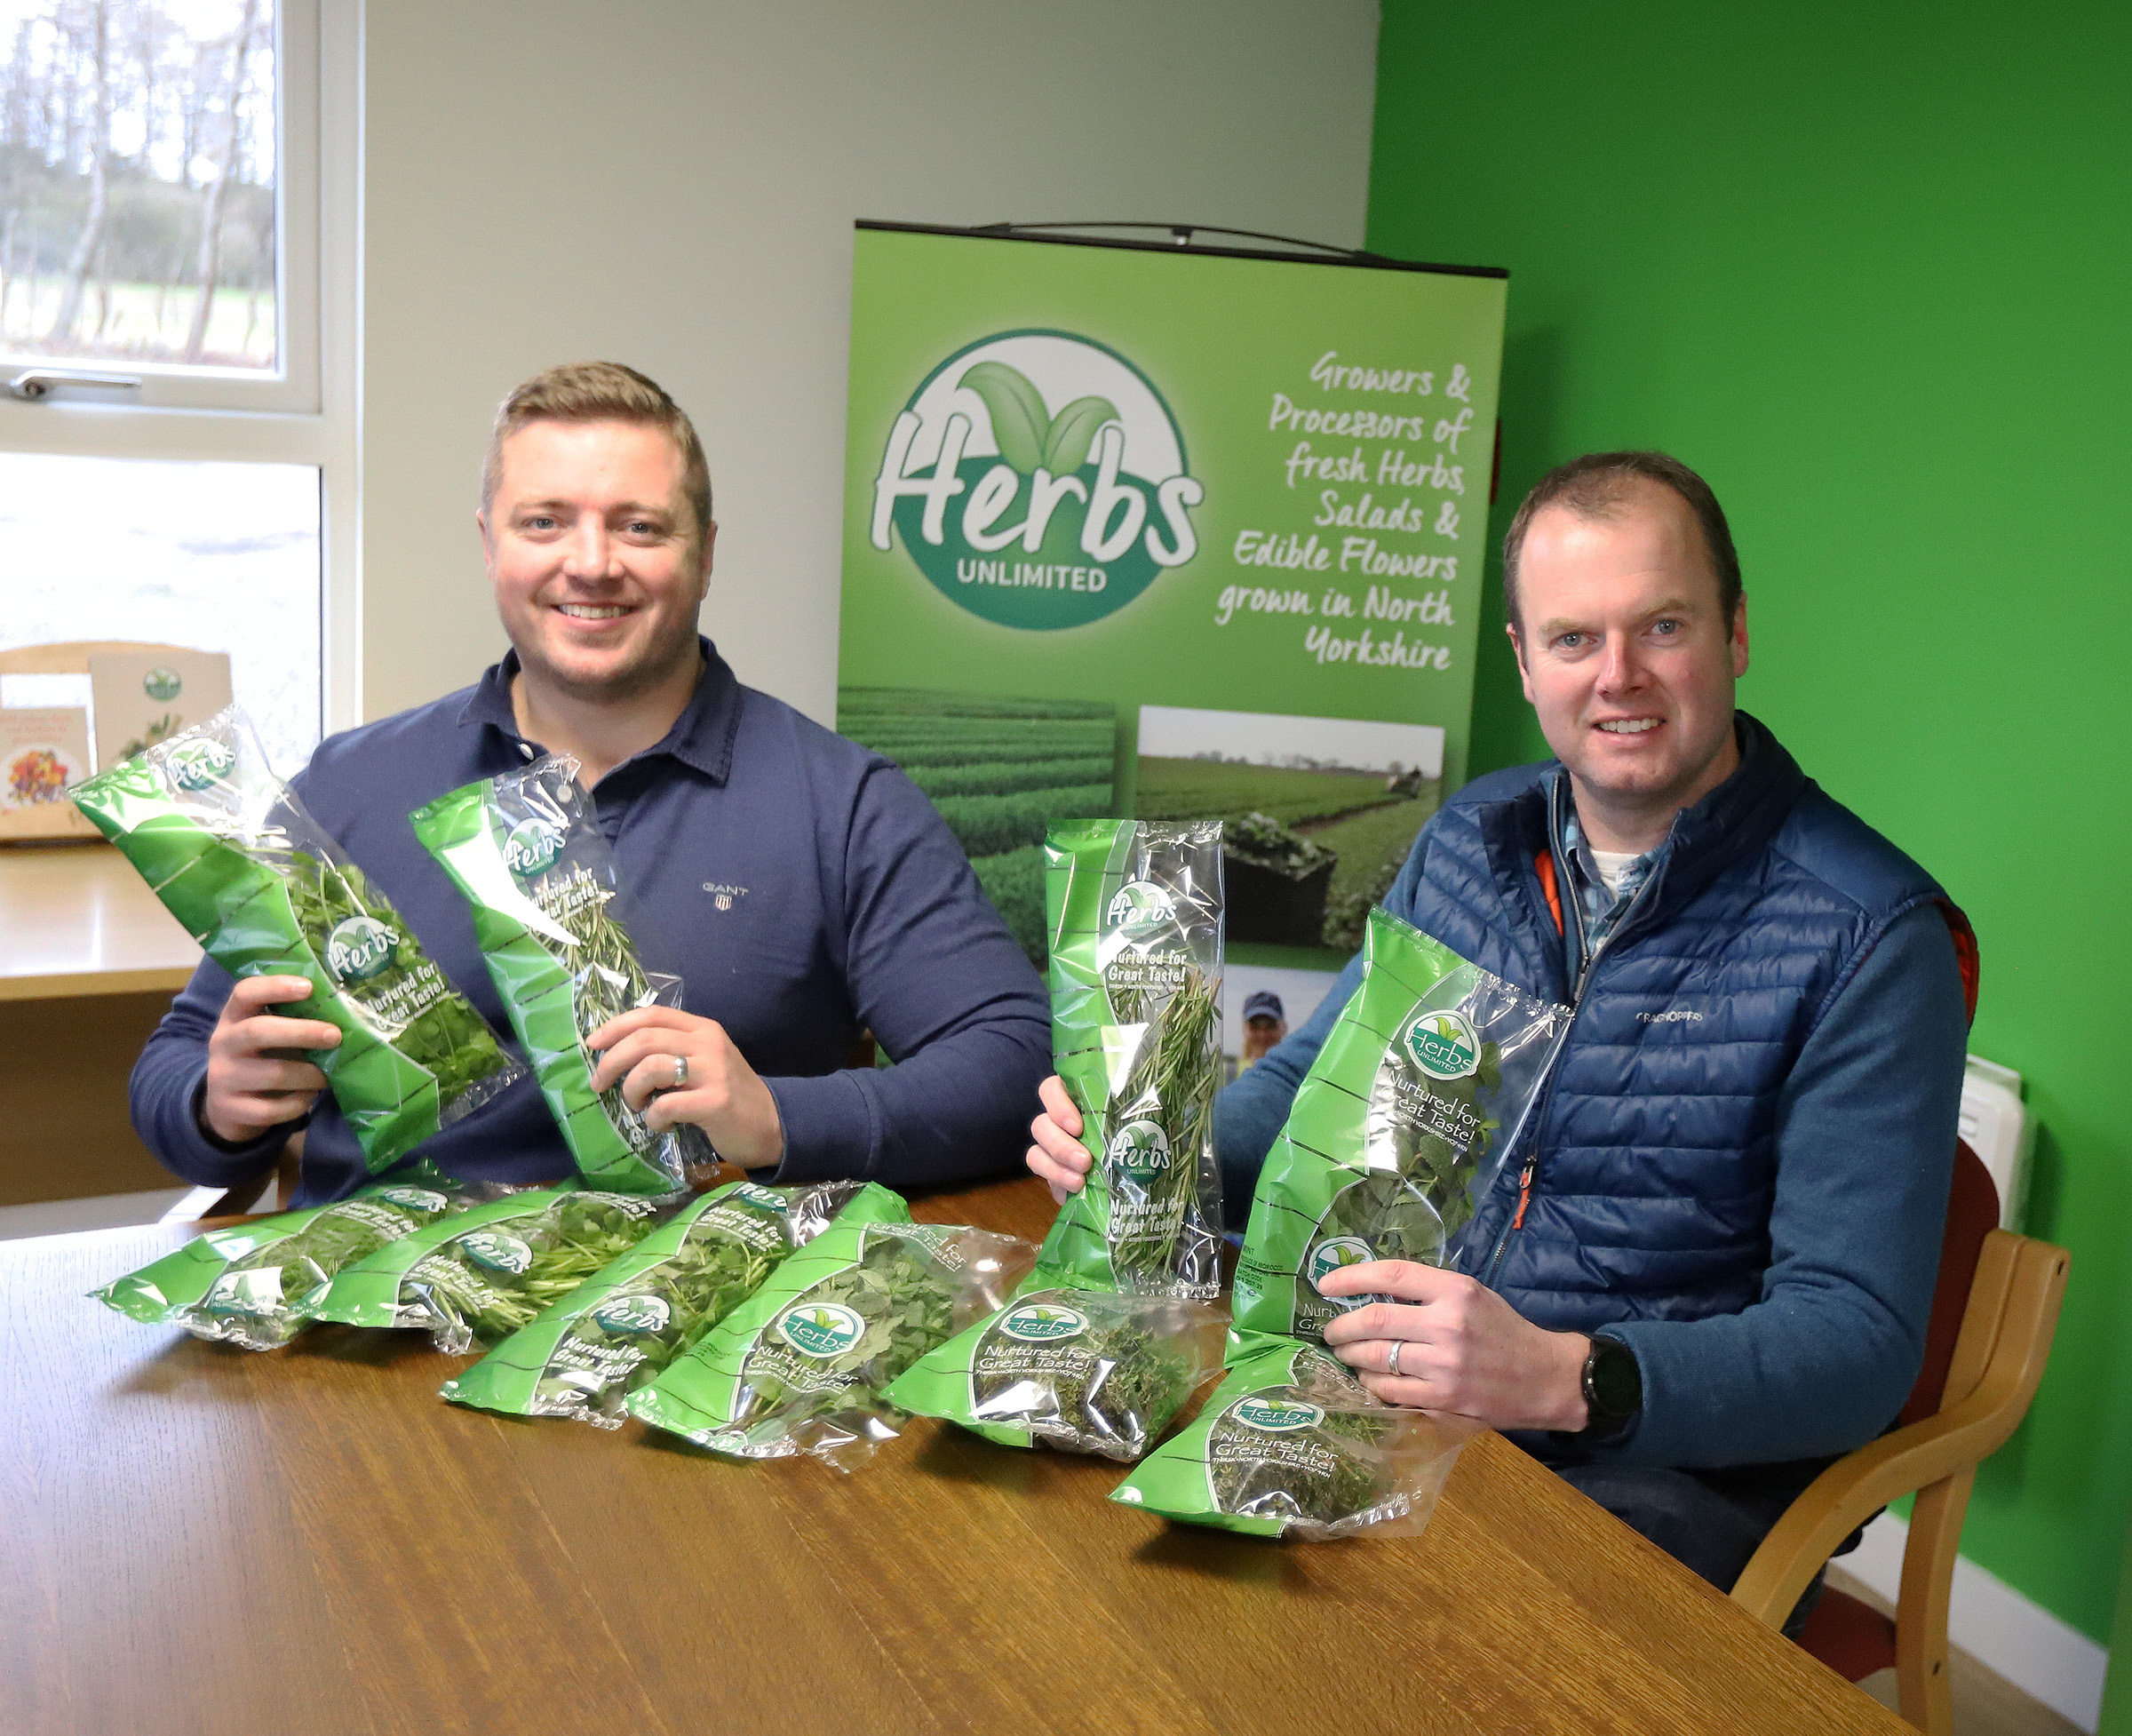 Wilf Whittle, Fresh Trading Manager at James Hall & Co. Ltd, with Philip Dodd, Managing Director of Herbs Unlimited, as they launch the new lines of fresh herbs in SPAR North of England stores.